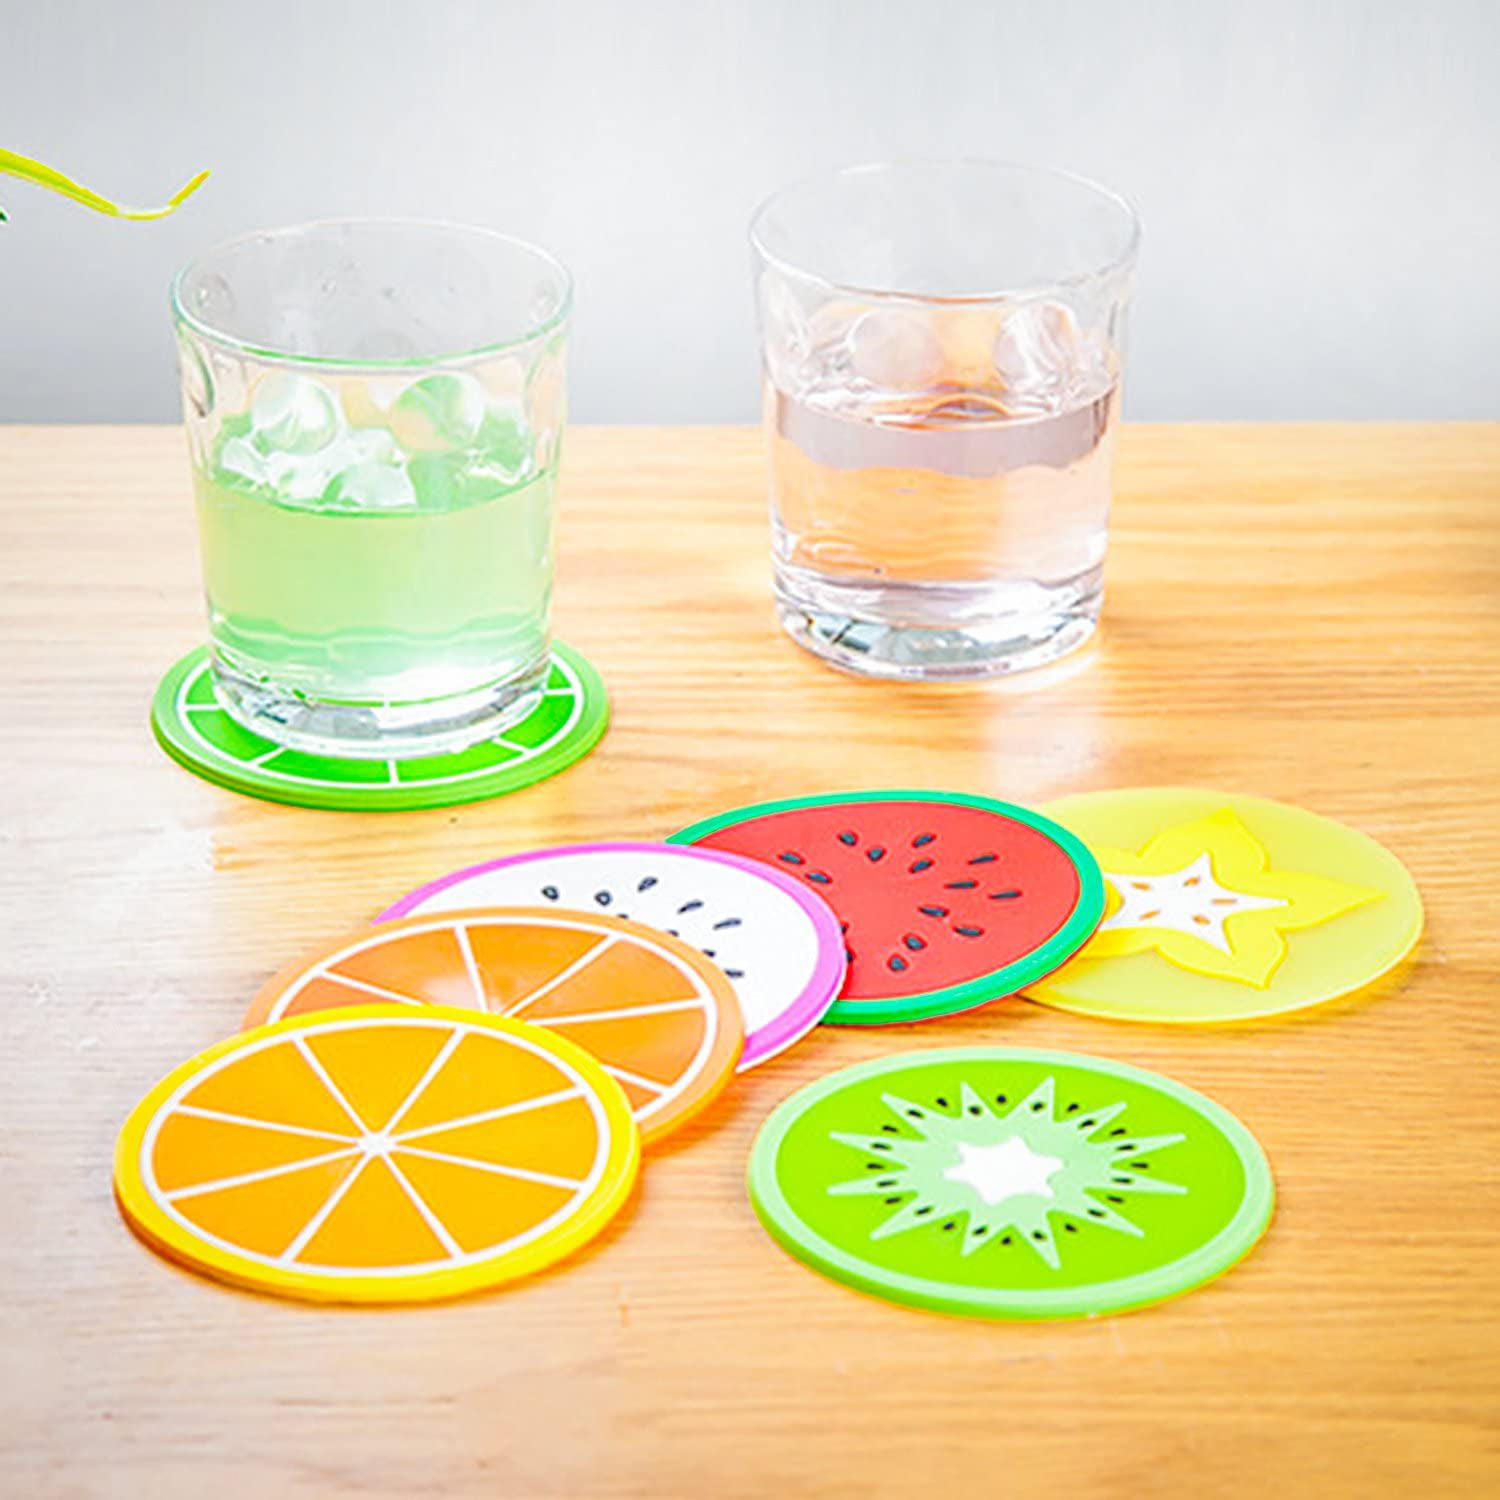 Details about    Fruit Silicone Coaster,Non Slip Heat Insulation Coasters,7PCS Cute Slice Silico 